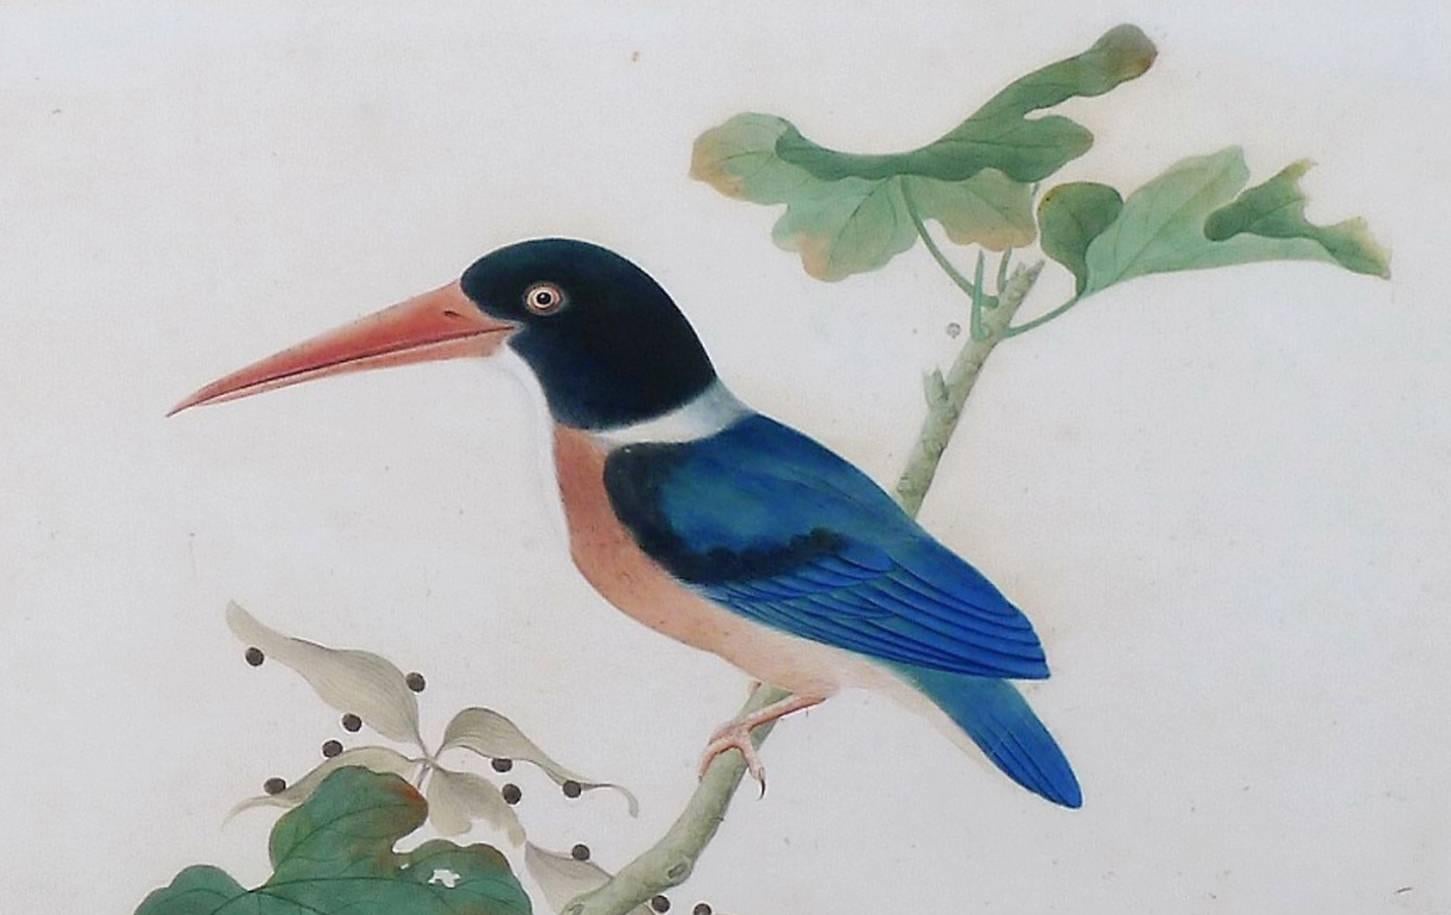 China trade large watercolor painting of a bird, 
Kingfisher,
circa 1800-1820.

Superb large China Trade watercolor painting of a large Kingfisher on a branch on European paper within modern decoupage frame.

Dimensions: 20 1/2 inches x 23 1.2